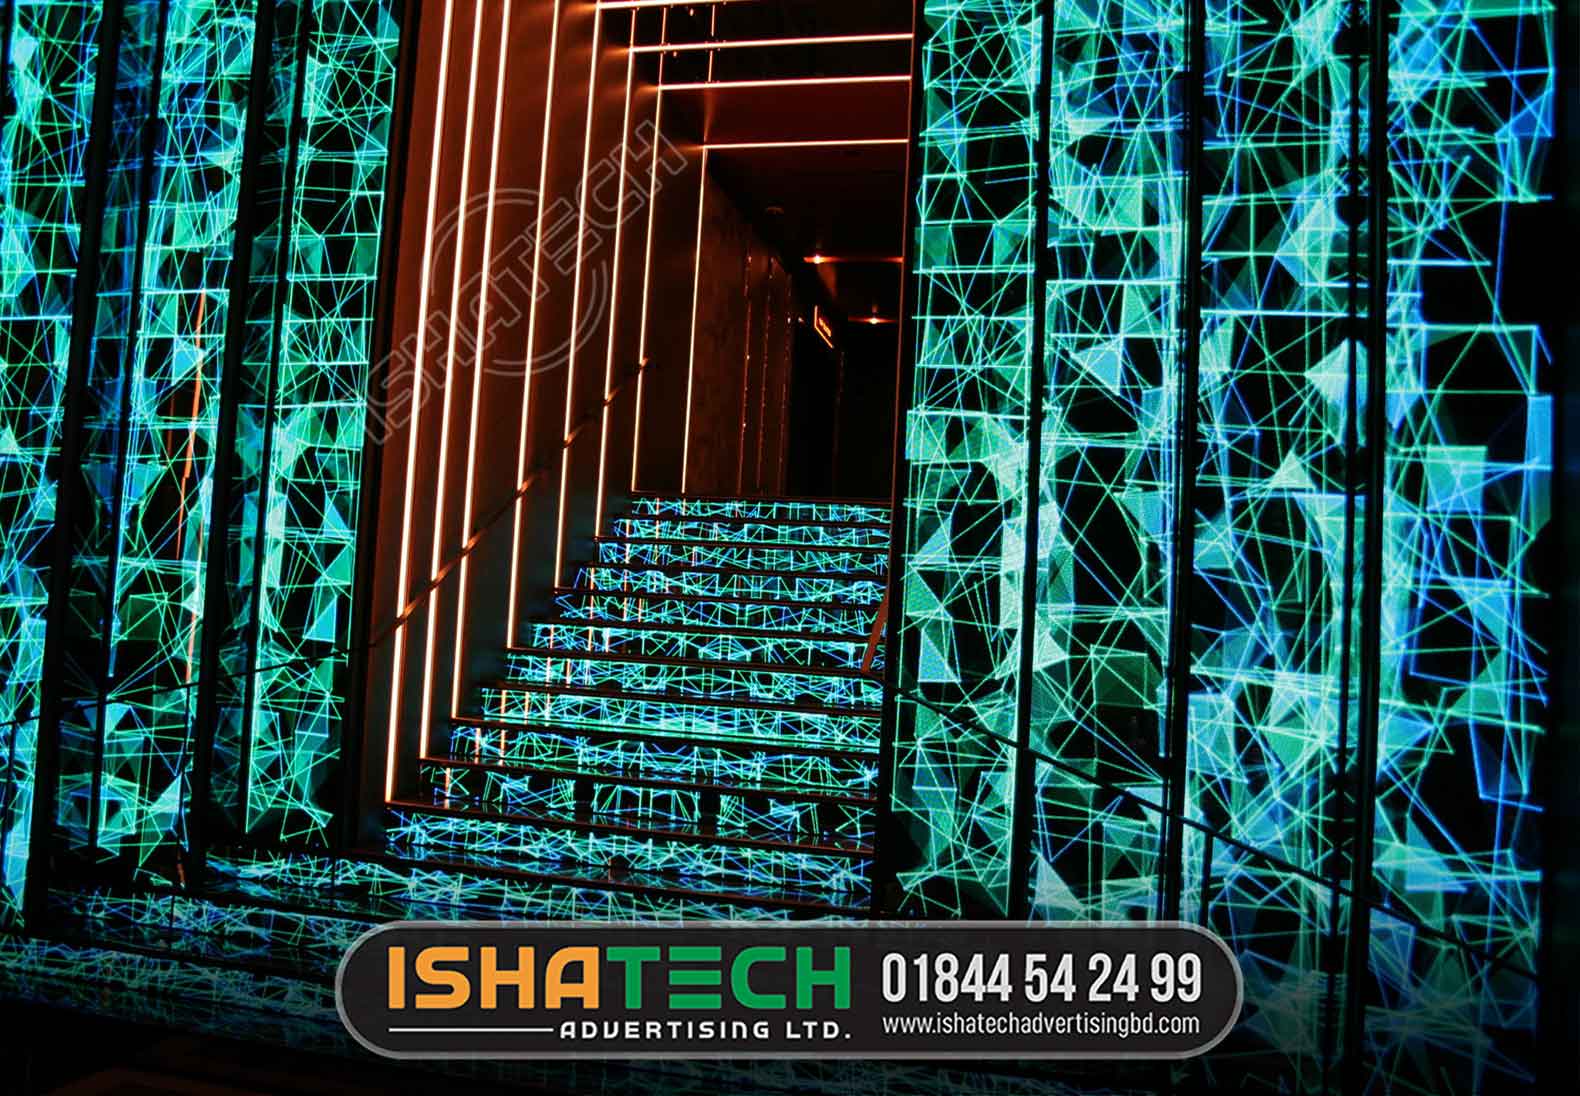 Video Times Stairs Fixed Led Display, Indoor, The Universe is endless, It is infinite, It is boundless In this age of Metaverse and Digital Life, digitizing your outdoor space can pave your way towards creation of a Tech Savvy Organisation Imagine the possibilities Get tailormade solutions for your outdoor space through our specially curated outdoor LED Display Technology Get your tailor made solution for your outdoor space and get assured with our unmatchable tech support Unsere Outdoor LED Display Technology wird in vielen Bereichen verwendet, wie z. B. bei Bauprojekten, Regierungsarenen, Corporate Houses, Retail Houses, Institutionen und digitalen OOH-Bereichen. Die Vorteile unserer Outdoor LED Display Technology sind: Wasserdicht, energieeffizient, weatherproof, remote operational, software-unterstützt.